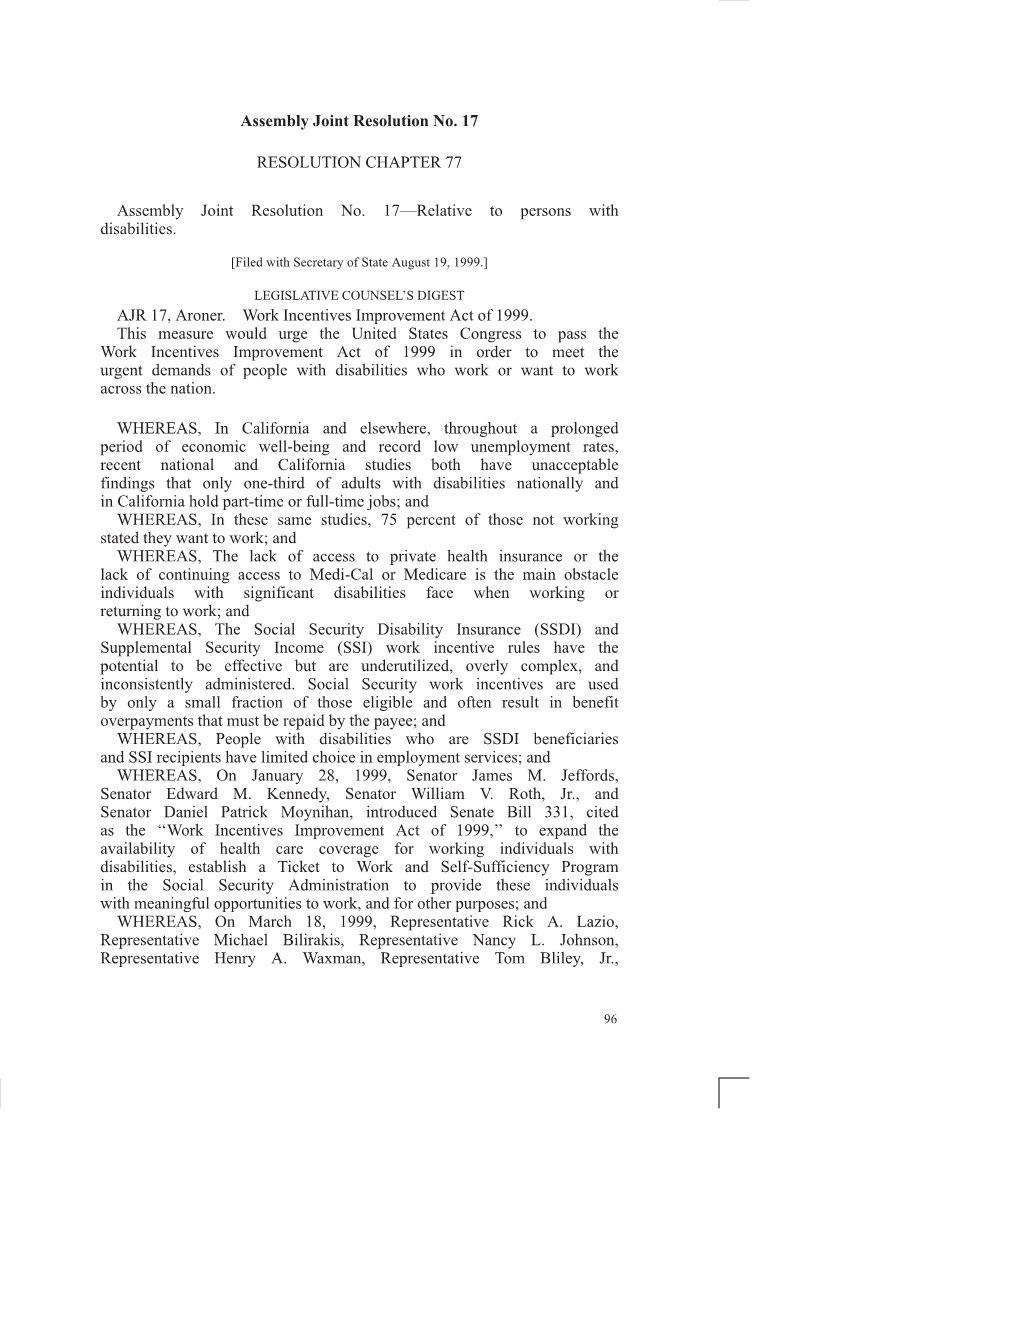 Assembly Joint Resolution No. 17 RESOLUTION CHAPTER 77 Assembly Joint Resolution No. 17—Relative to Persons with Disabilities